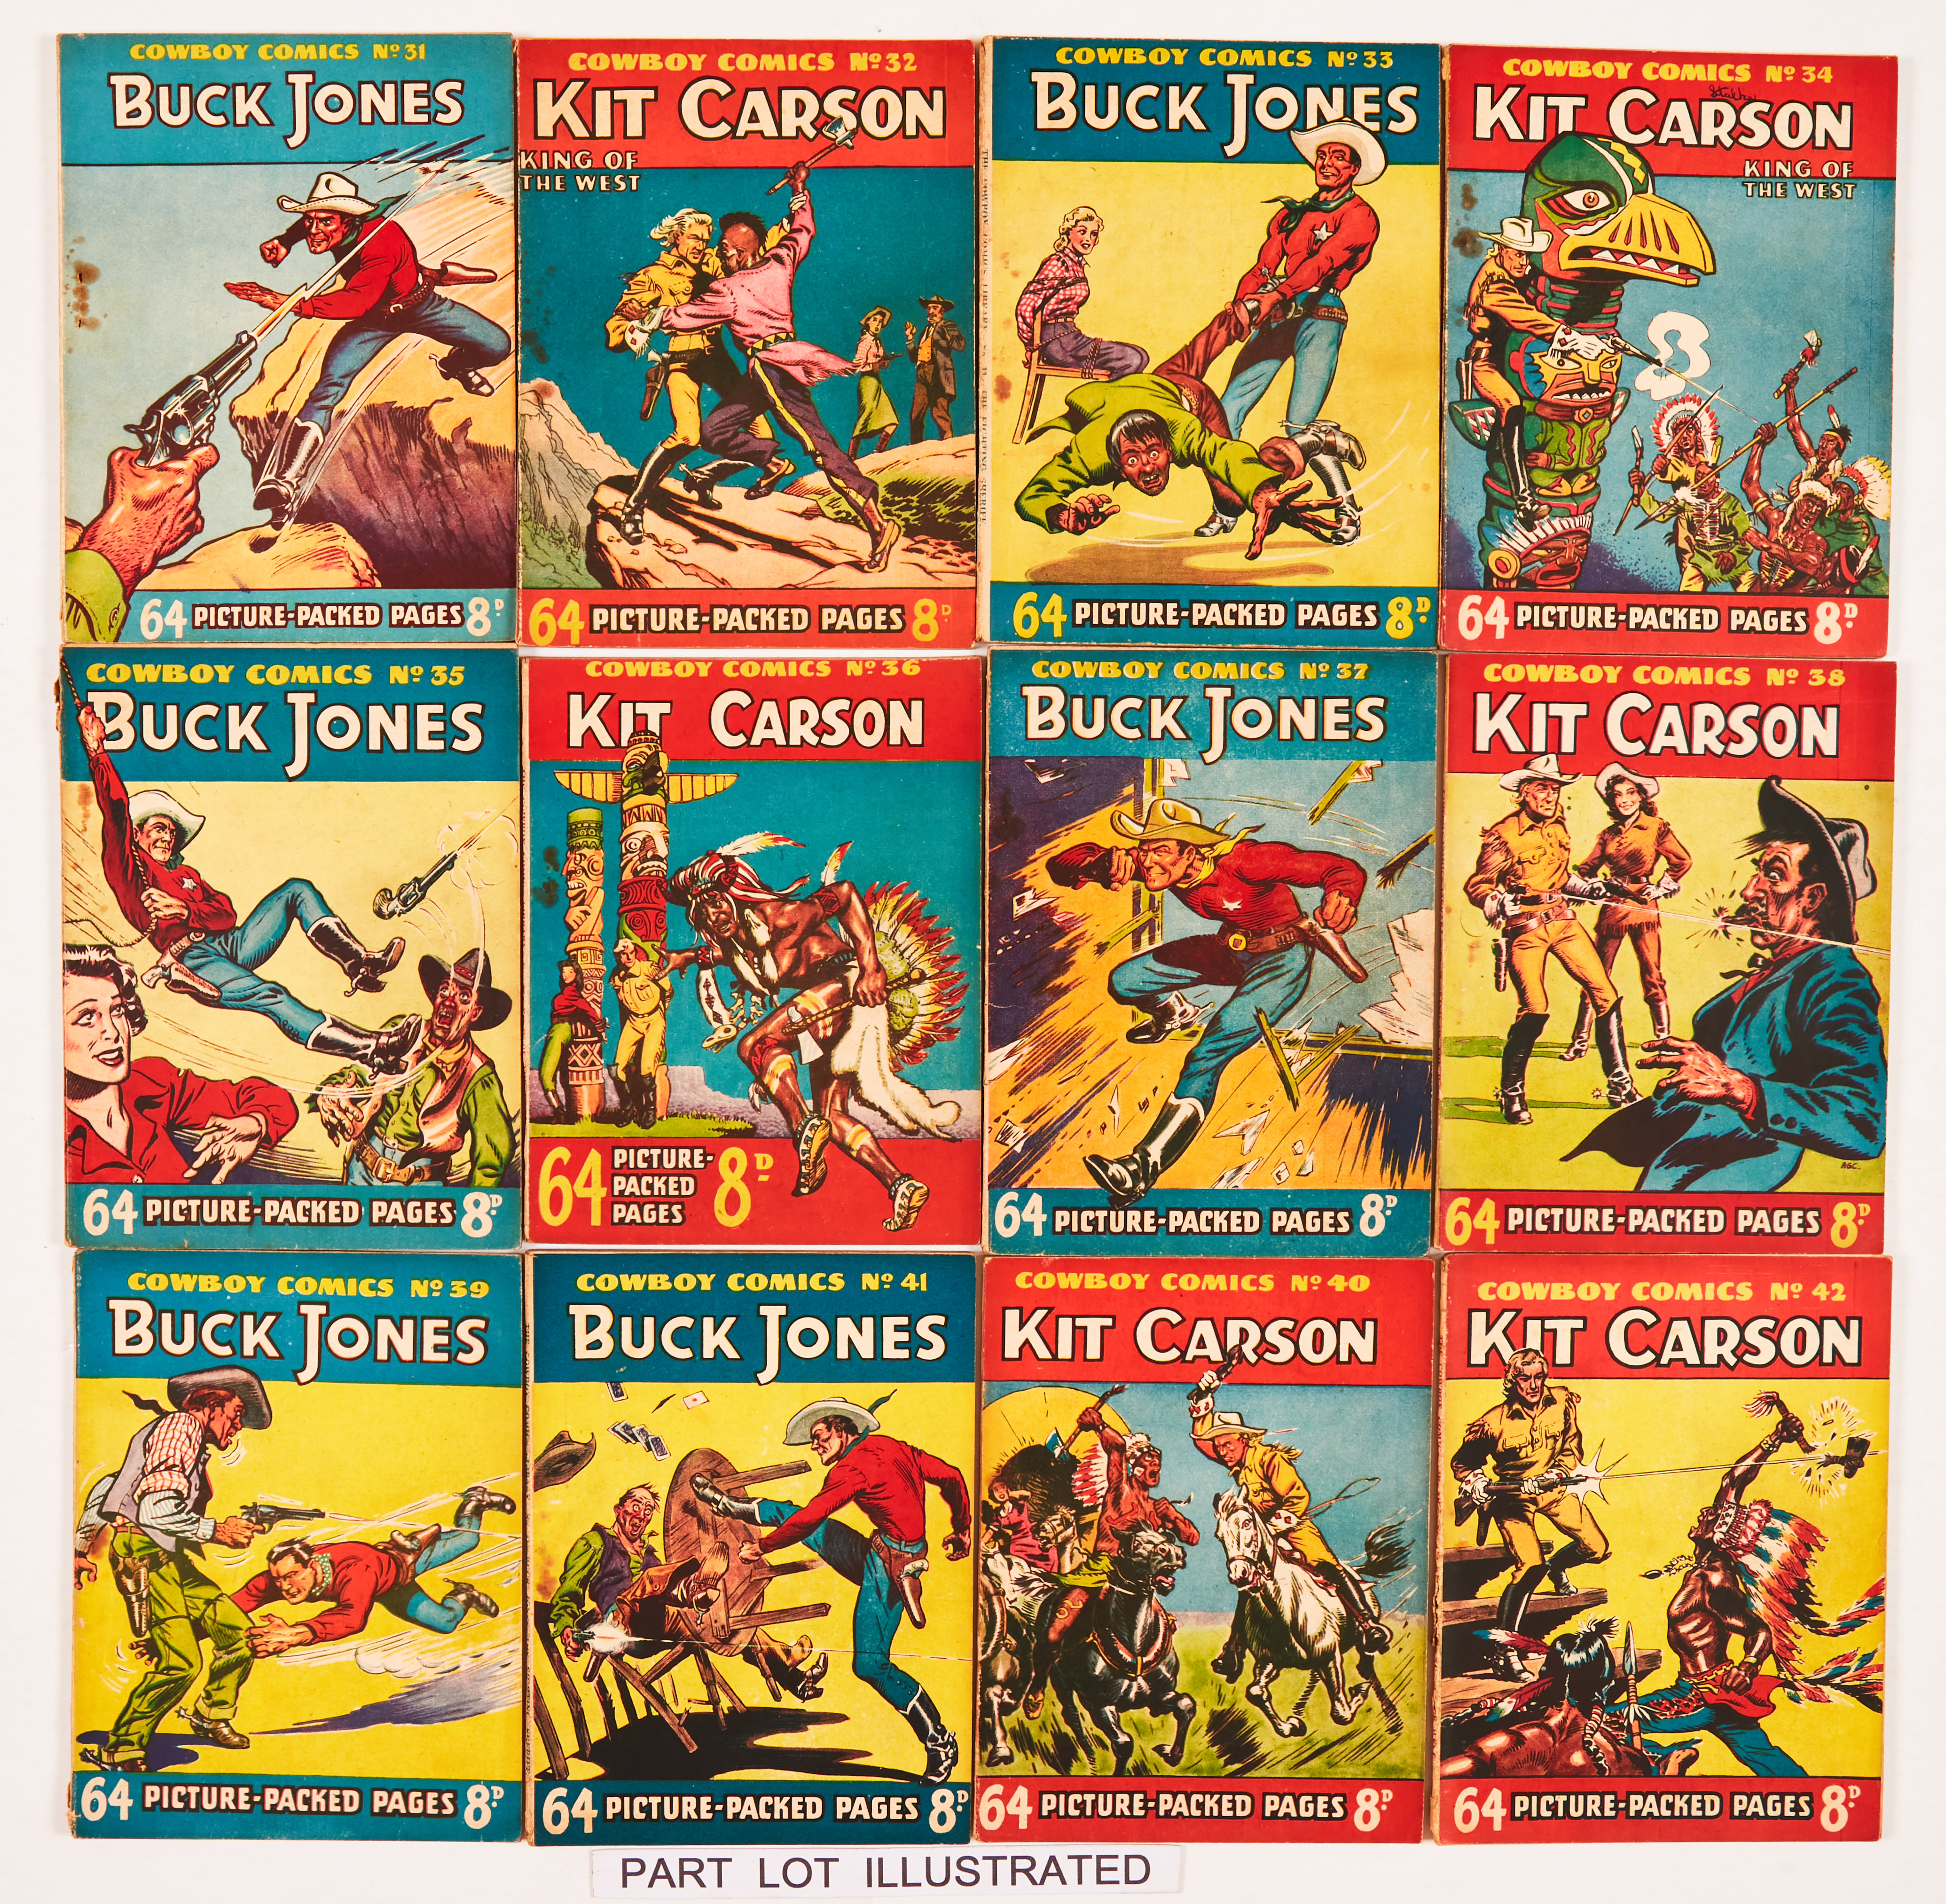 Cowboy Comics (1951) 31-50. Starring Buck Jones and Kit Carson. Bright covers with some rust spots